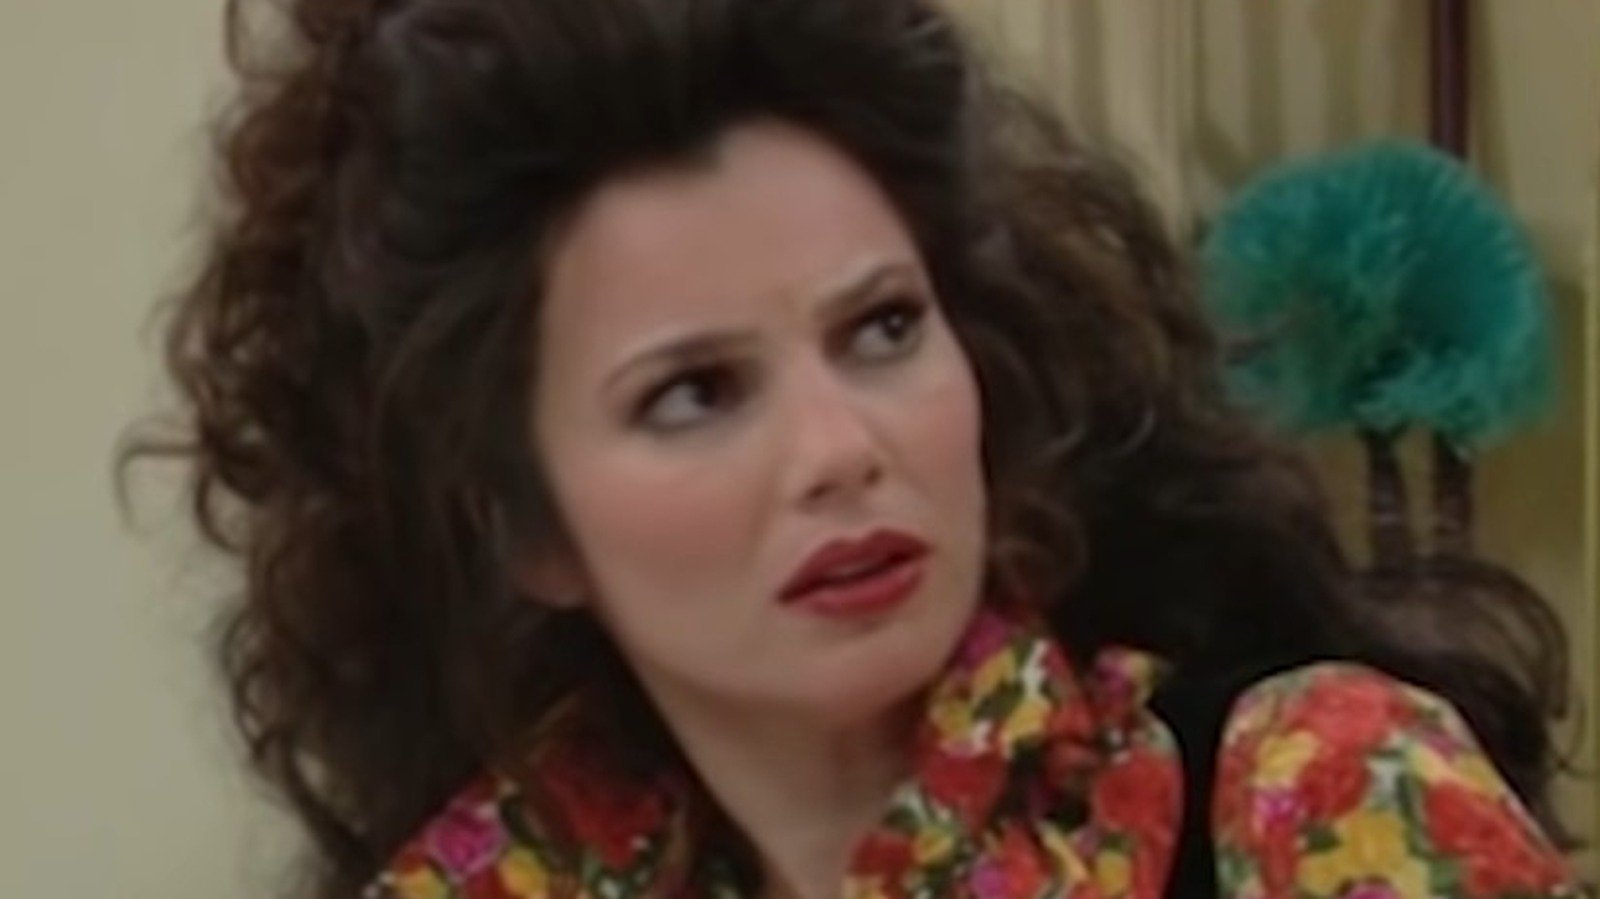 Things Only Adults Notice In The Nanny